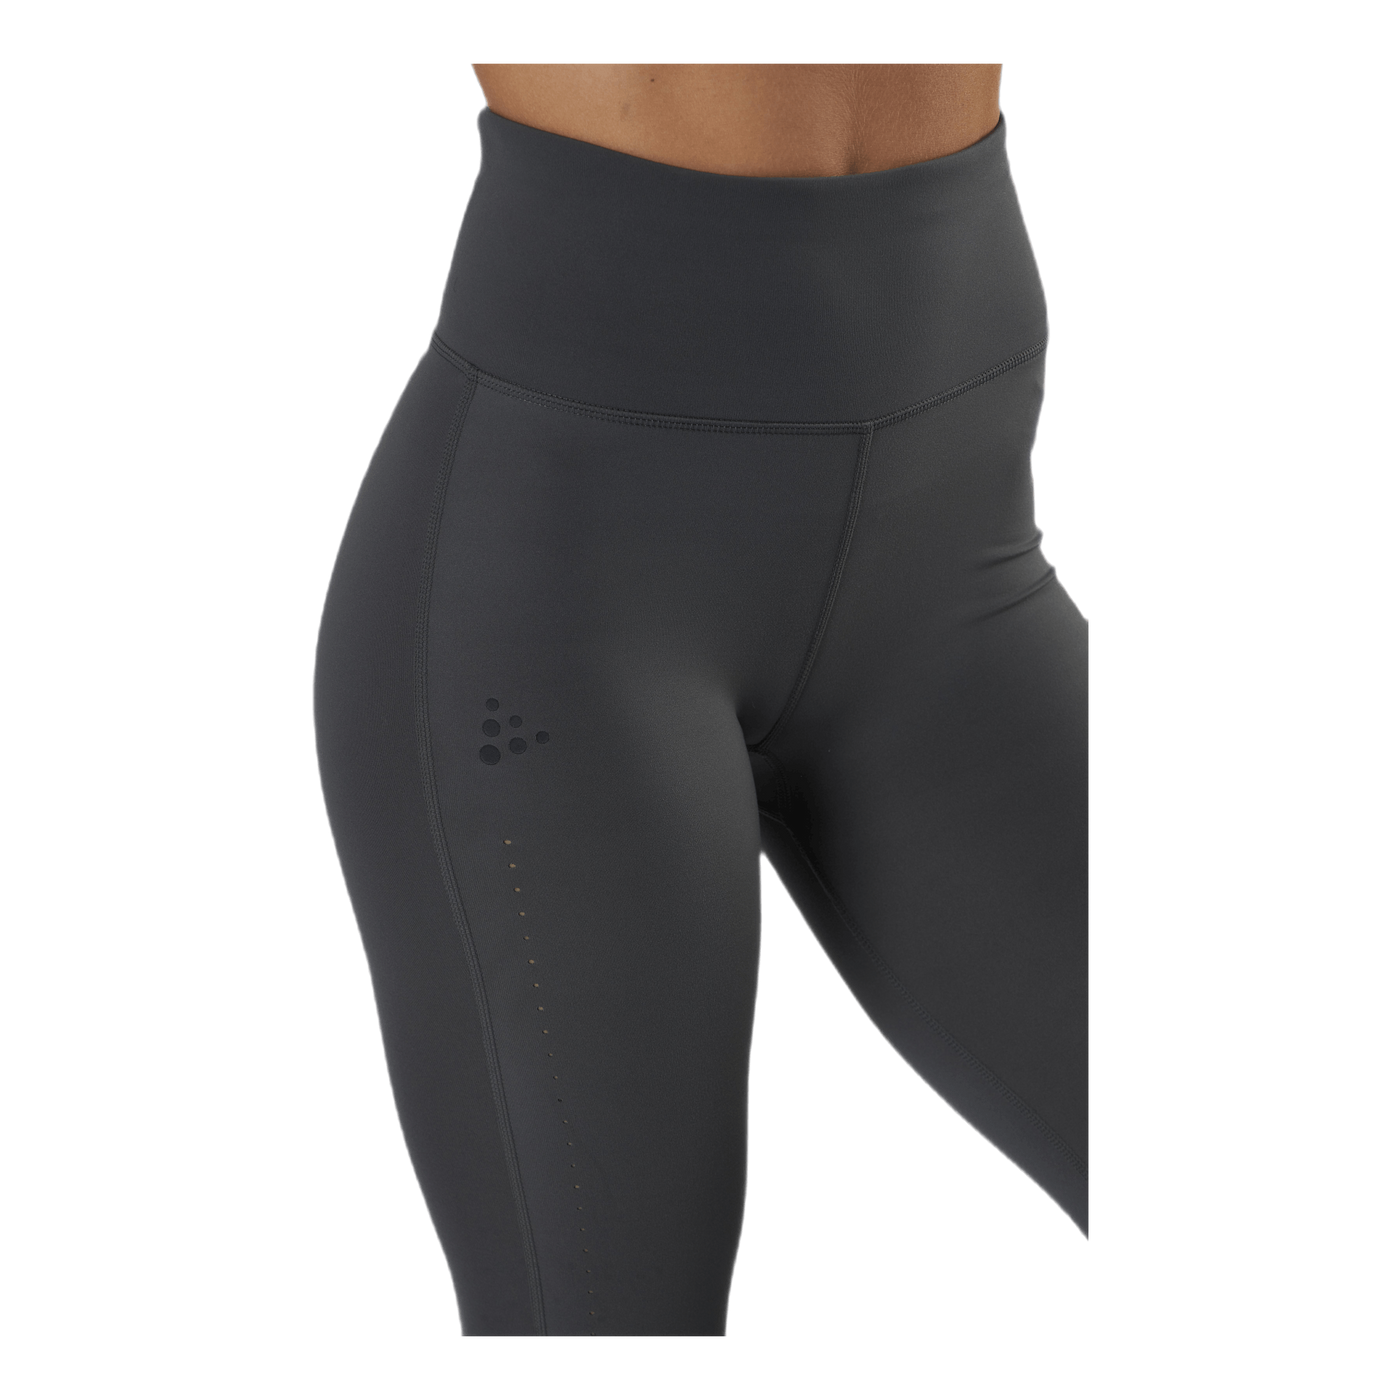 ADV Charge Perforated Tights Black/Grey